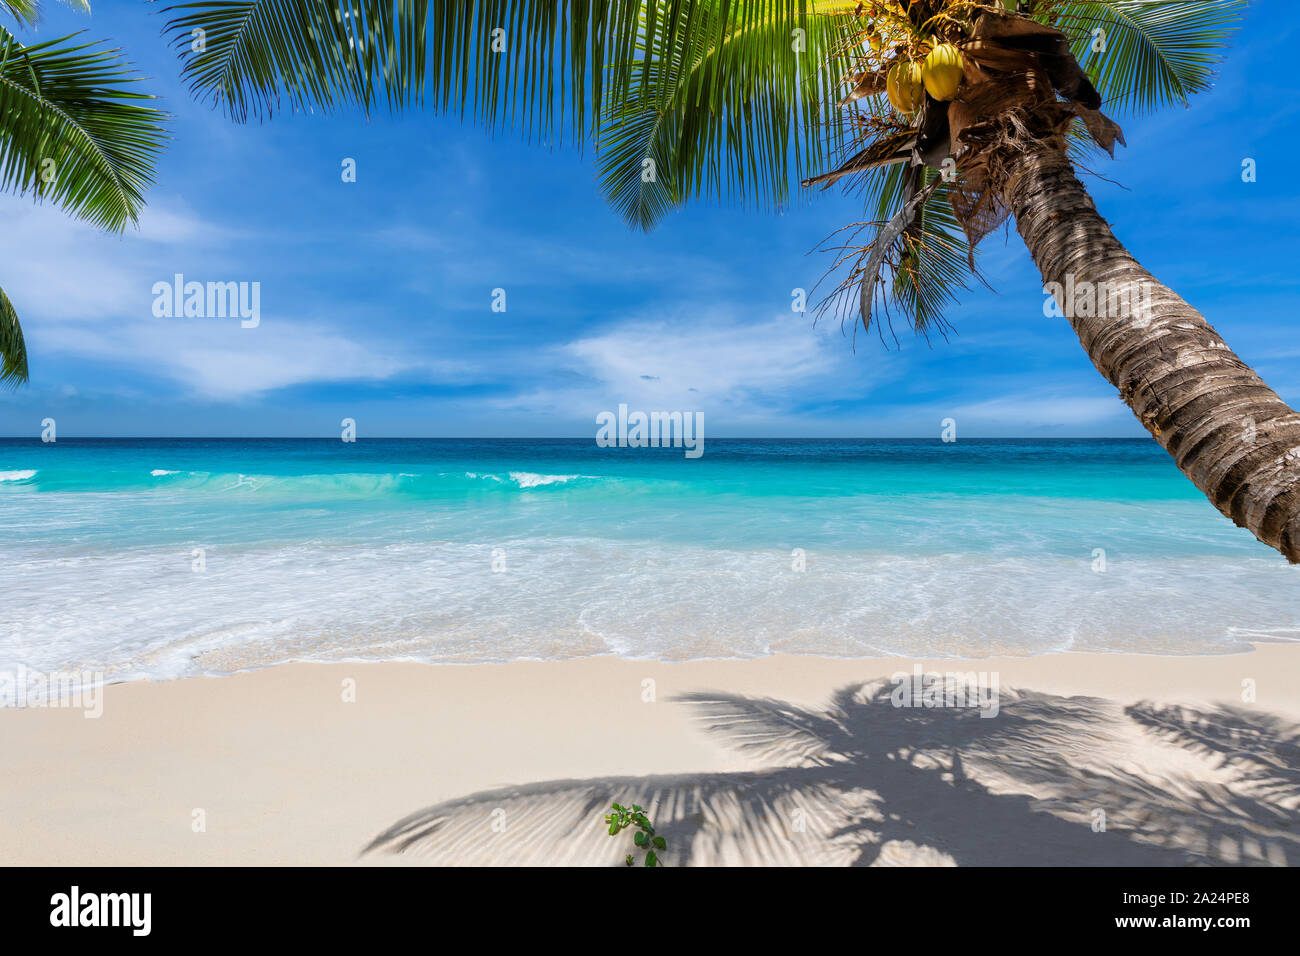 Coconut palm trees on Sunny beach and turquoise sea in Seychelles. Stock Photo